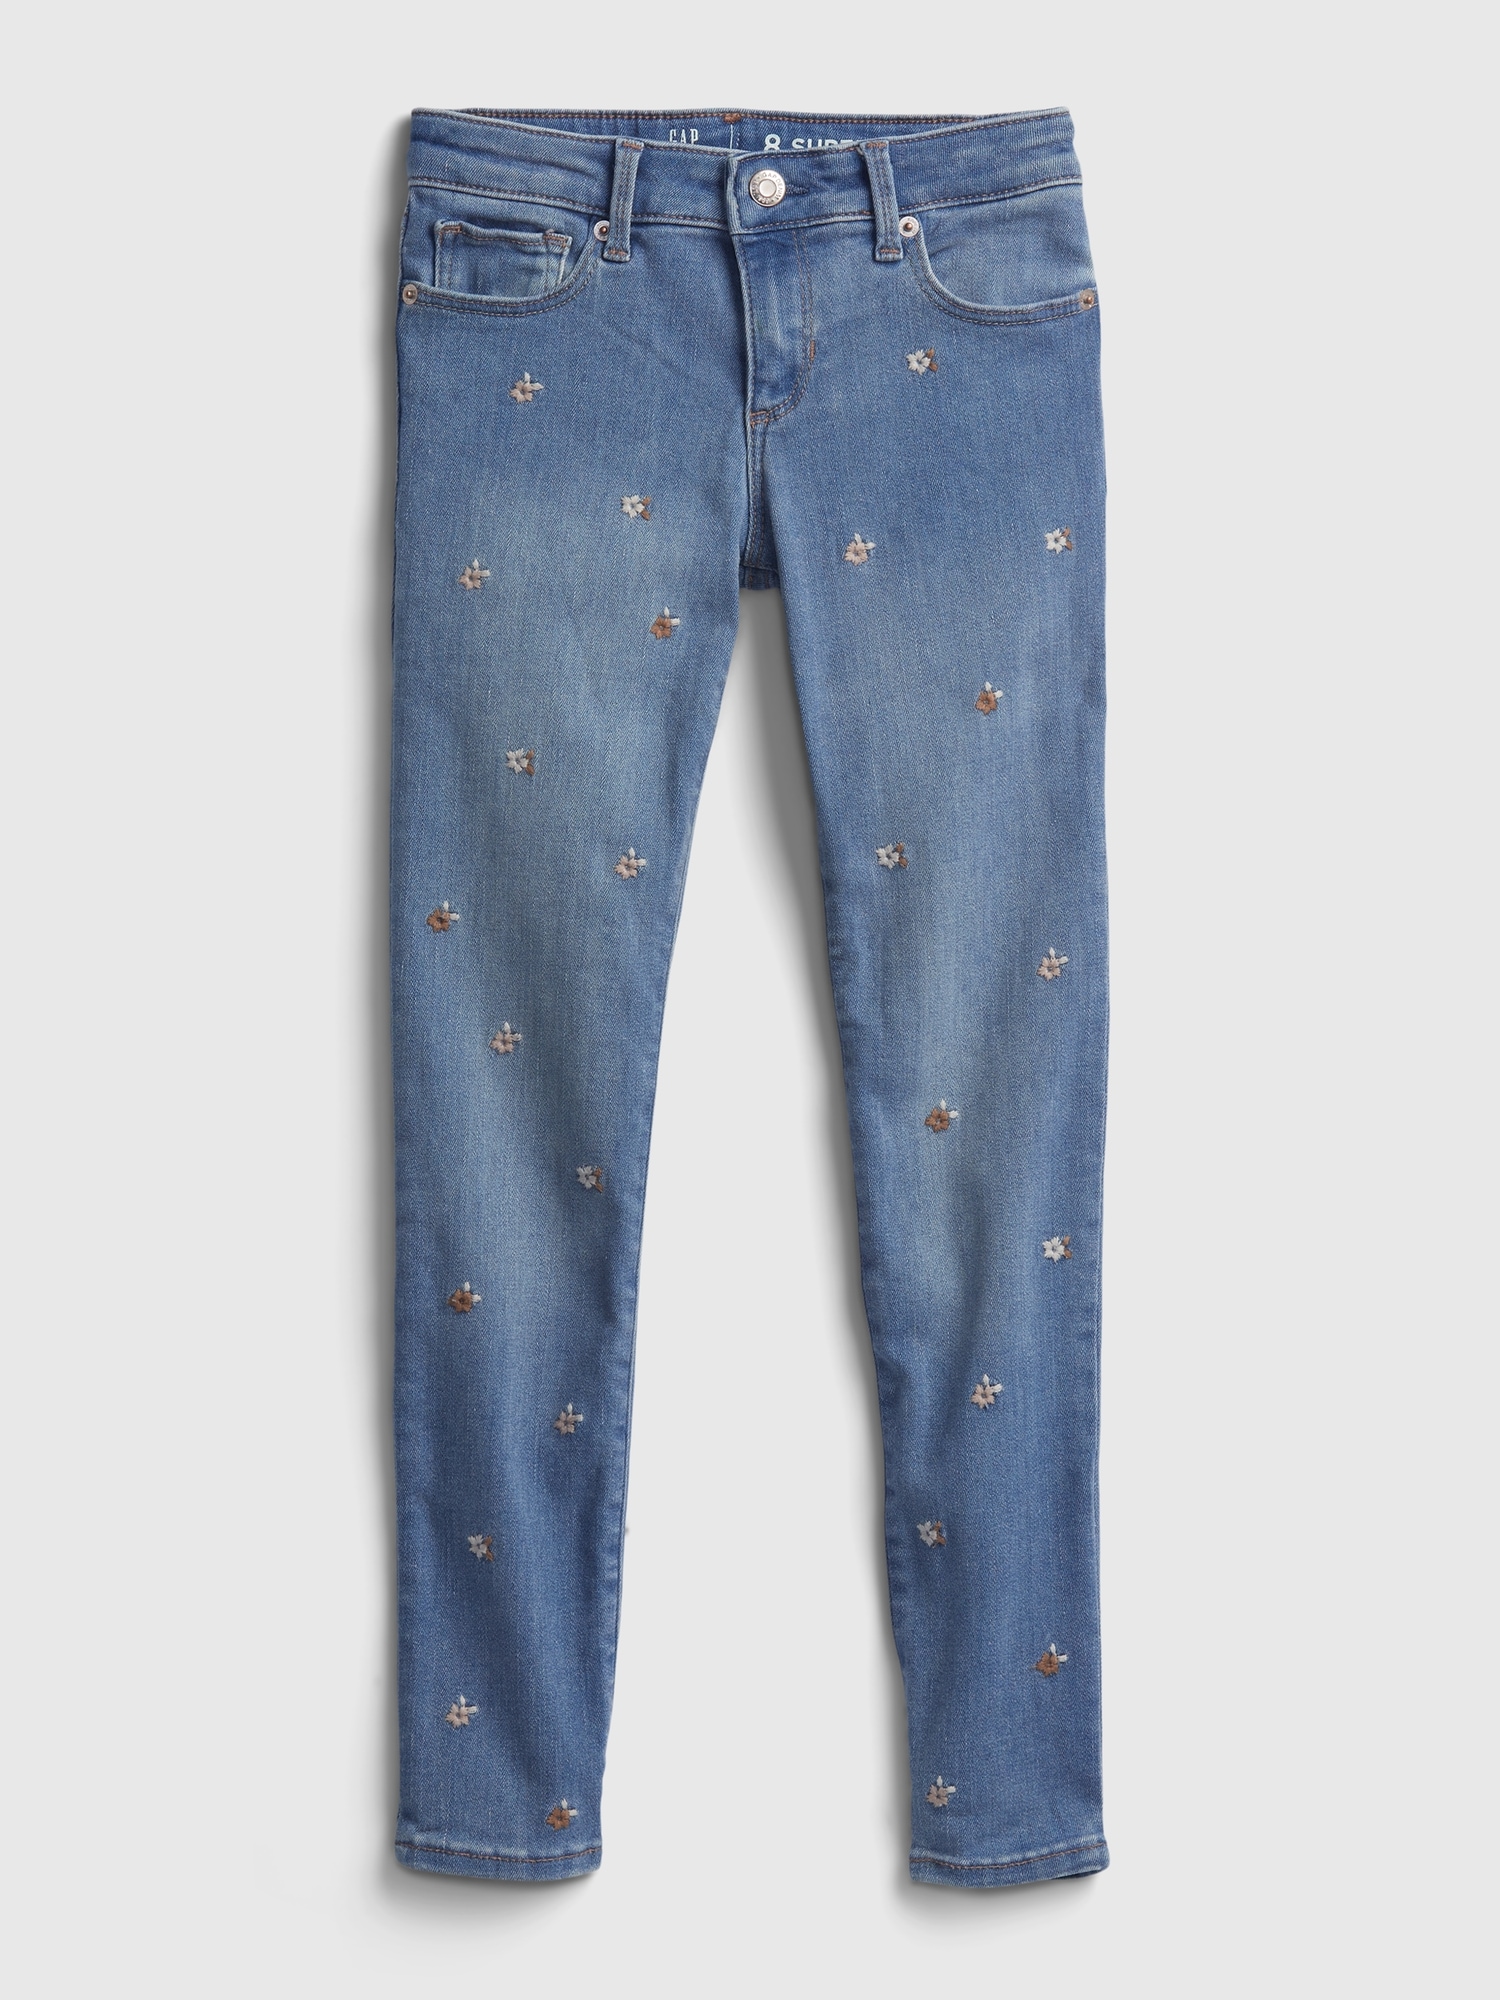 Kids Embroided Floral Skinny Jeans with Washwell ™ | Gap